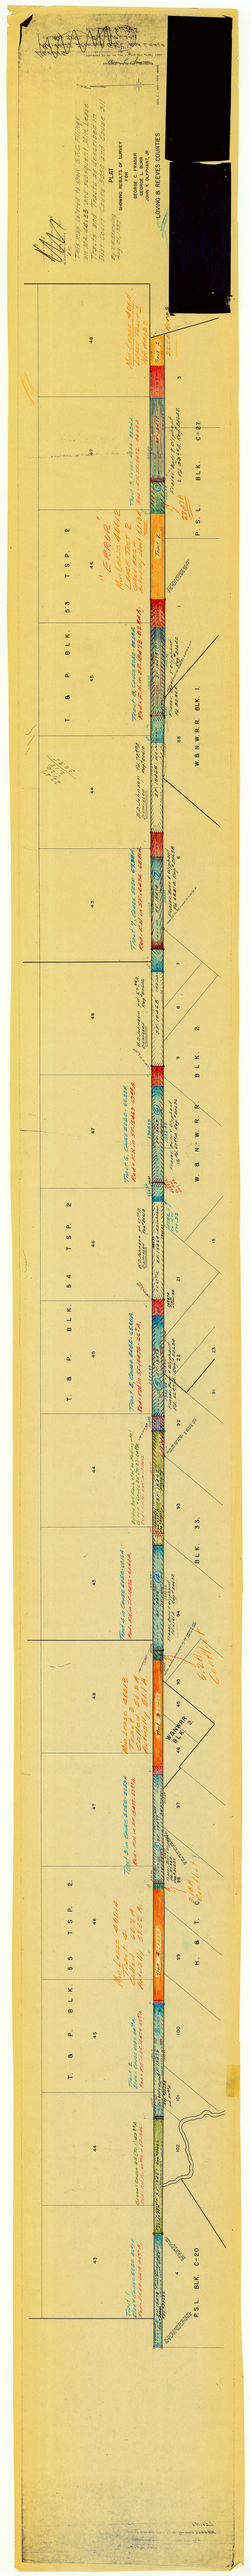 9467, Loving County Rolled Sketch 5, General Map Collection